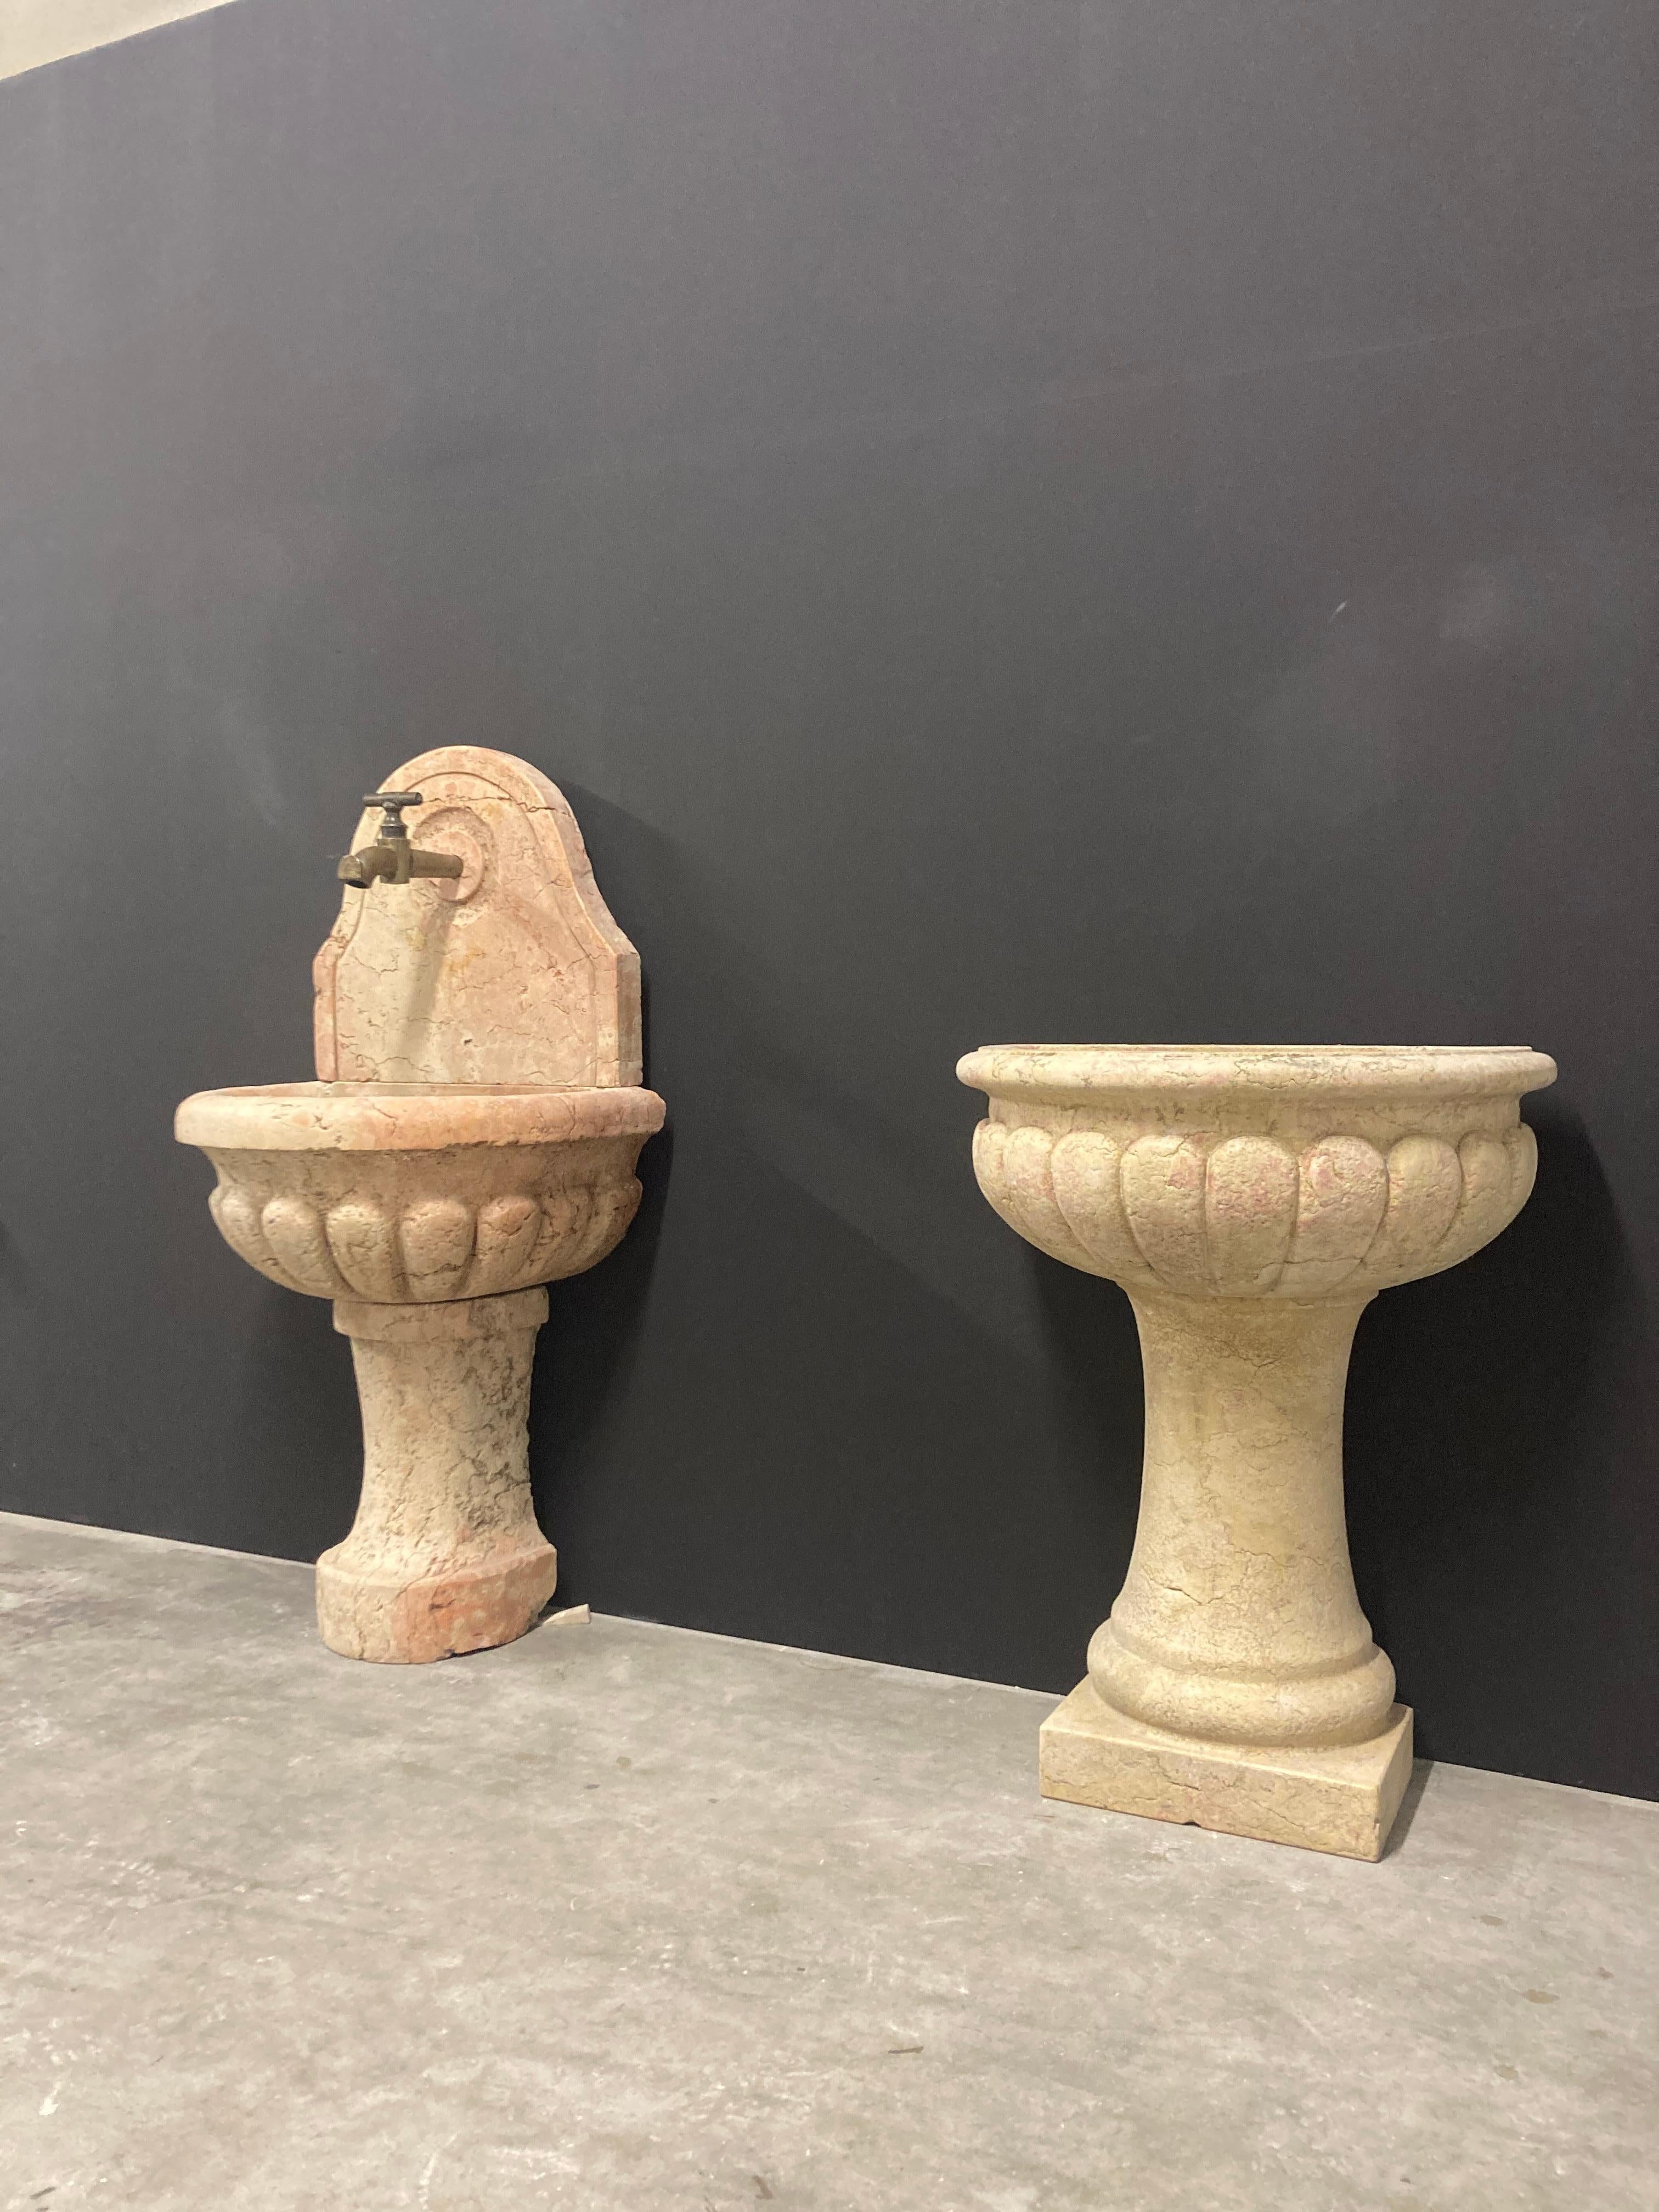 Happy to offer this great pair of Italian wall fountains.
These fountains date from the 19th century and are made from marble quarried in Verrone, Piedmont, Italy.

The left has a nice shaped backplate, both have strong shaped basins on rounded